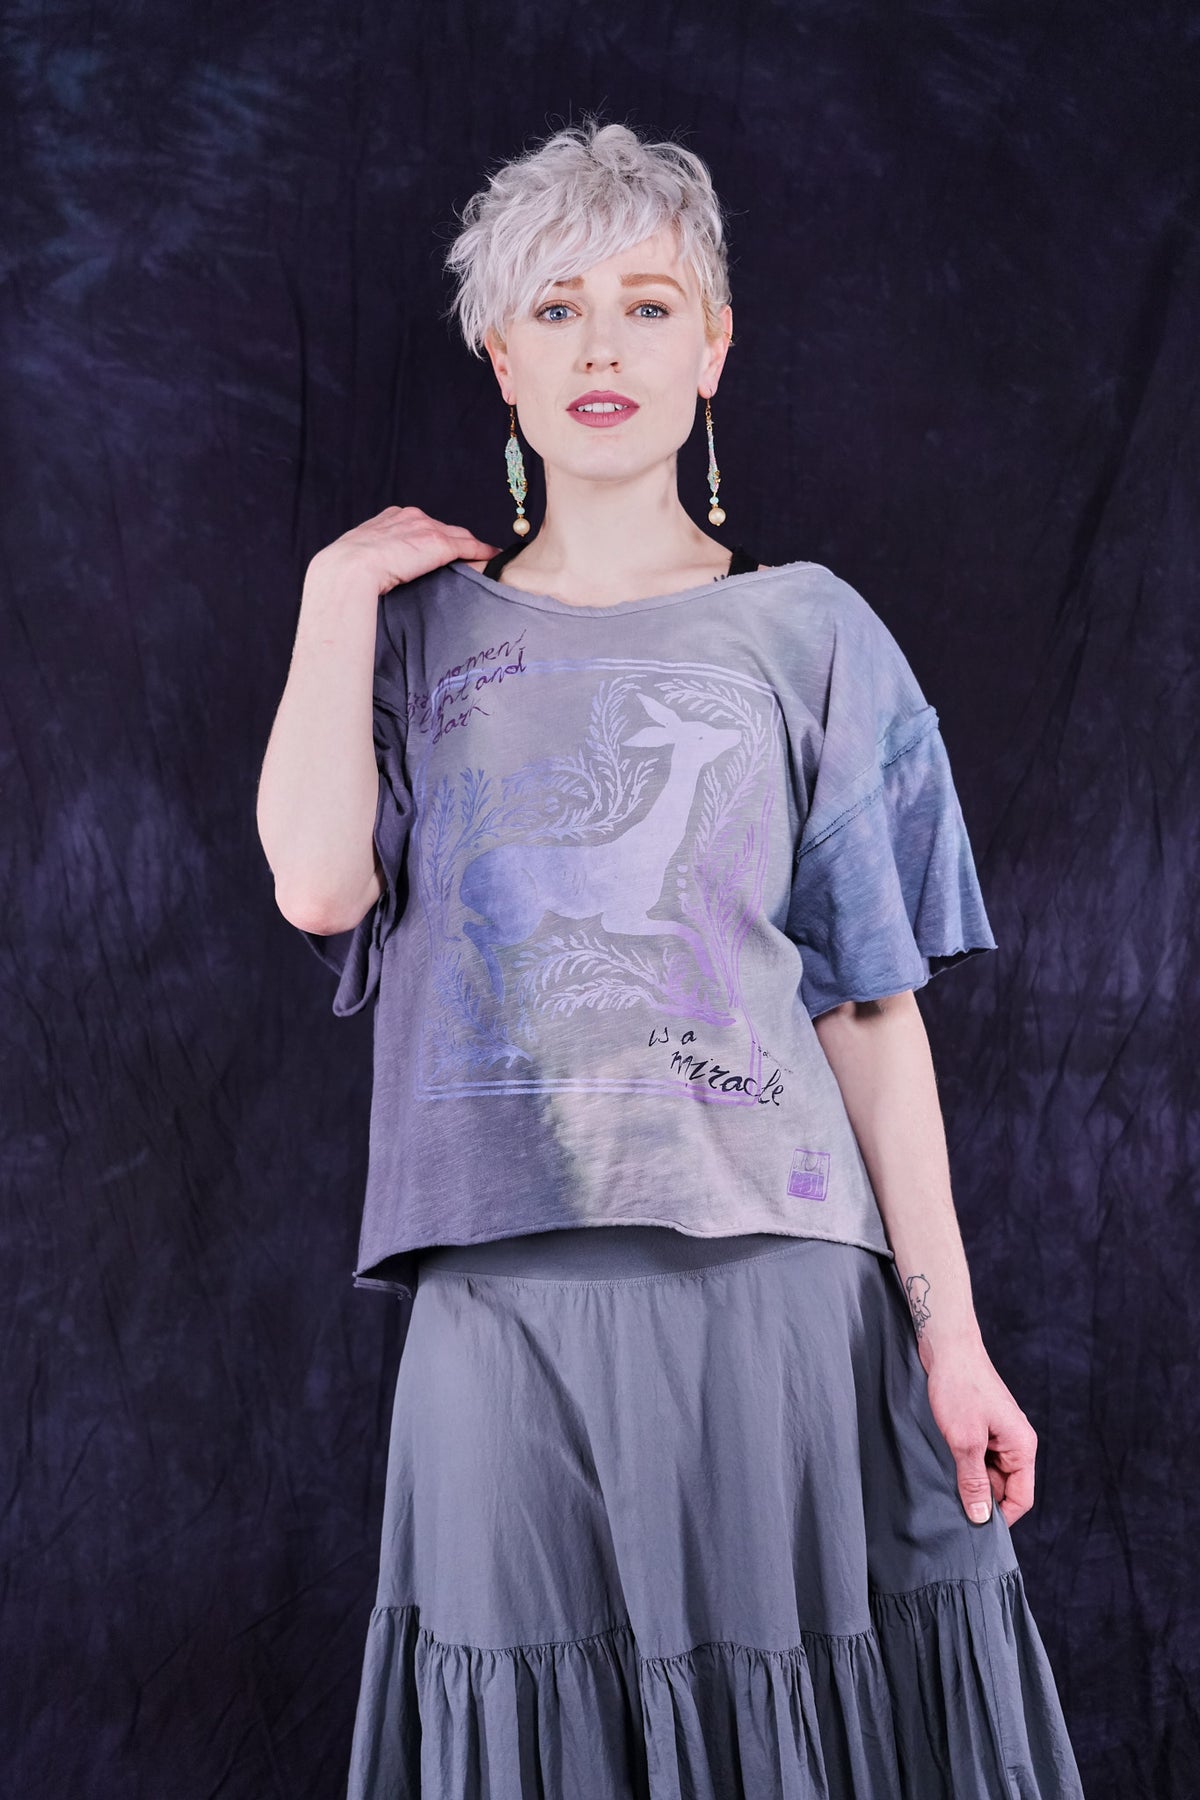 2295HD Deconstructed Art Tee Hand Dyed Vintage Photo-P